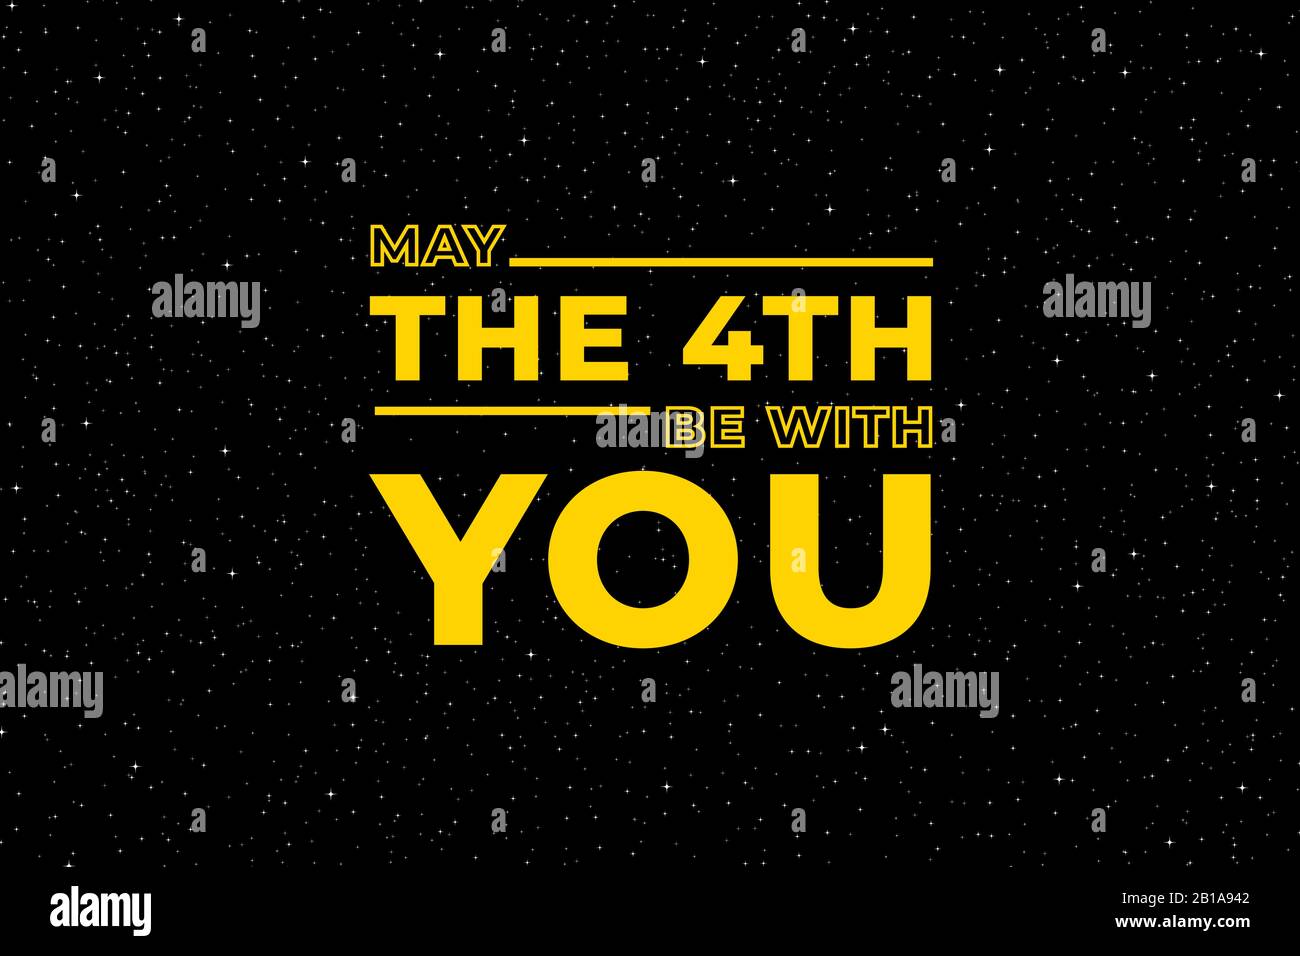 May the 4th be with you. Starry sky poster, star force and hand drawn stars vector illustration Stock Vector